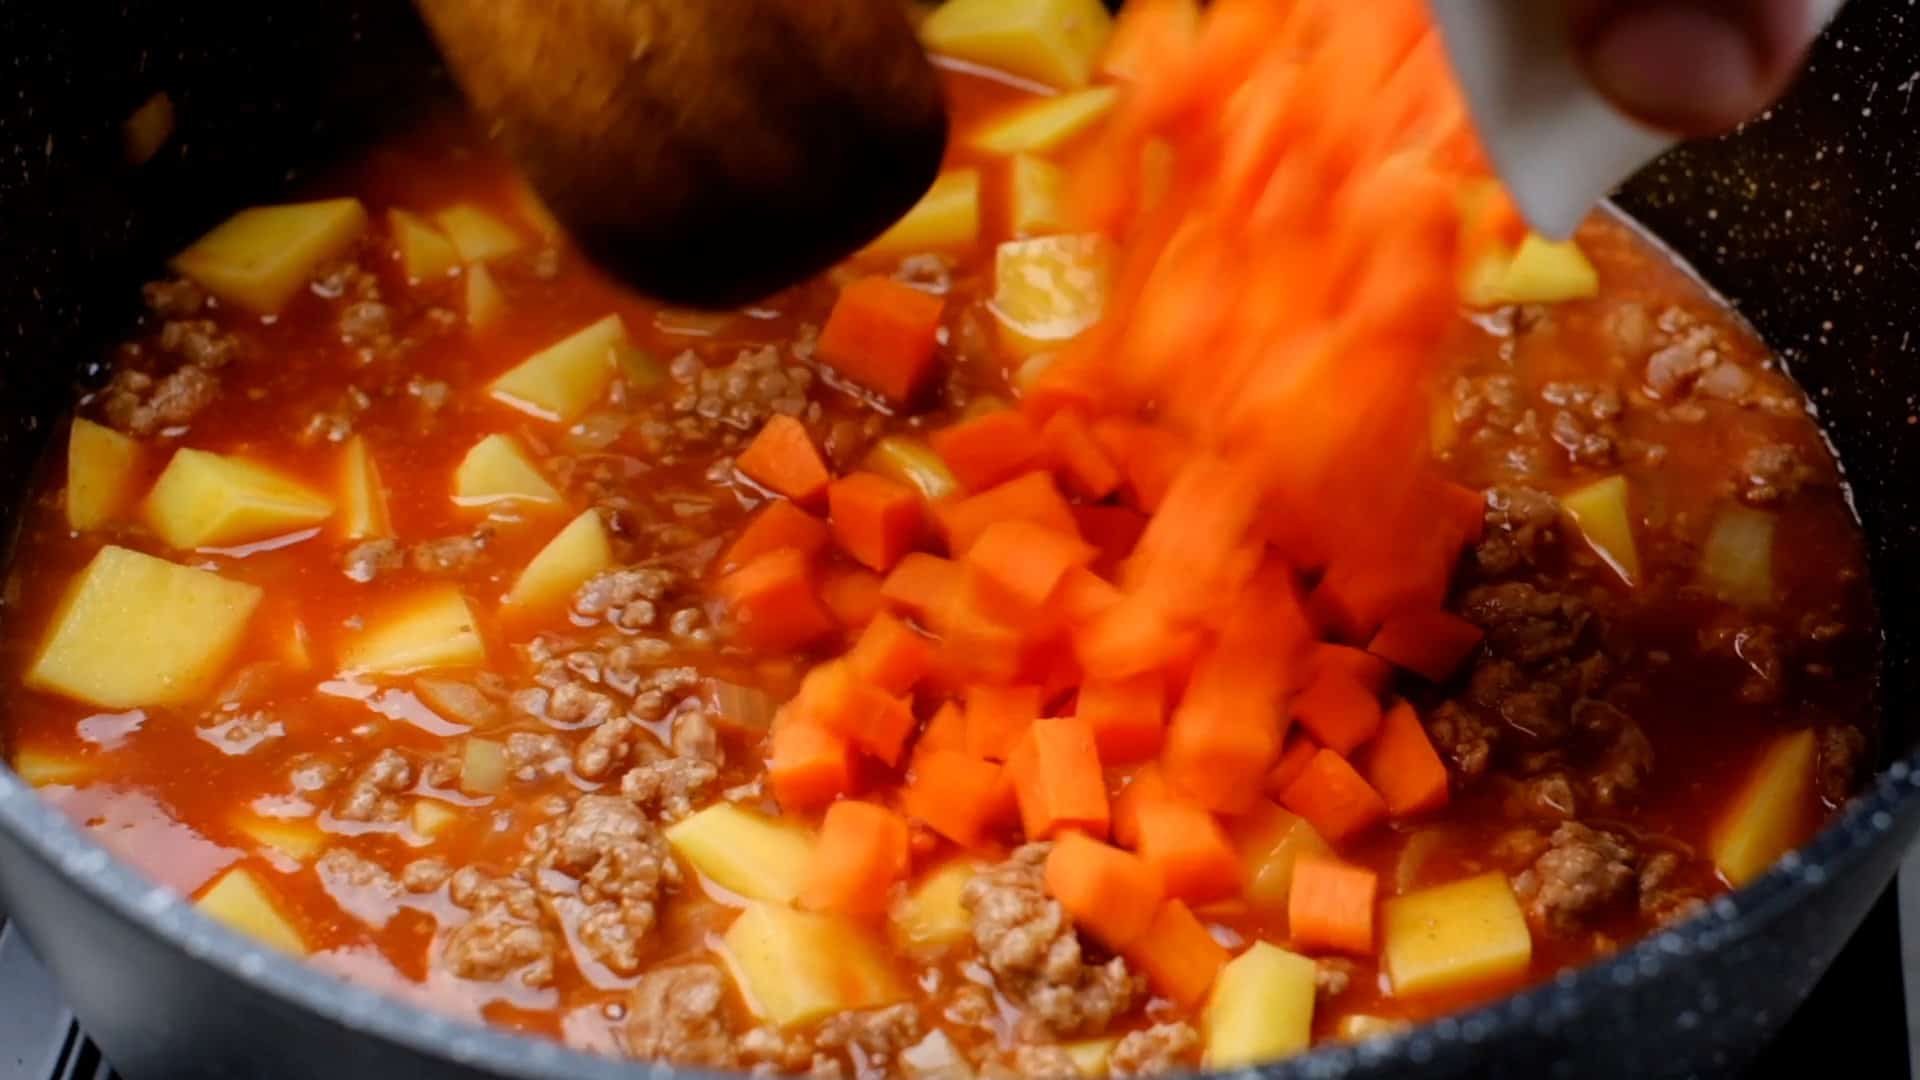 Cooking potato and carrot.